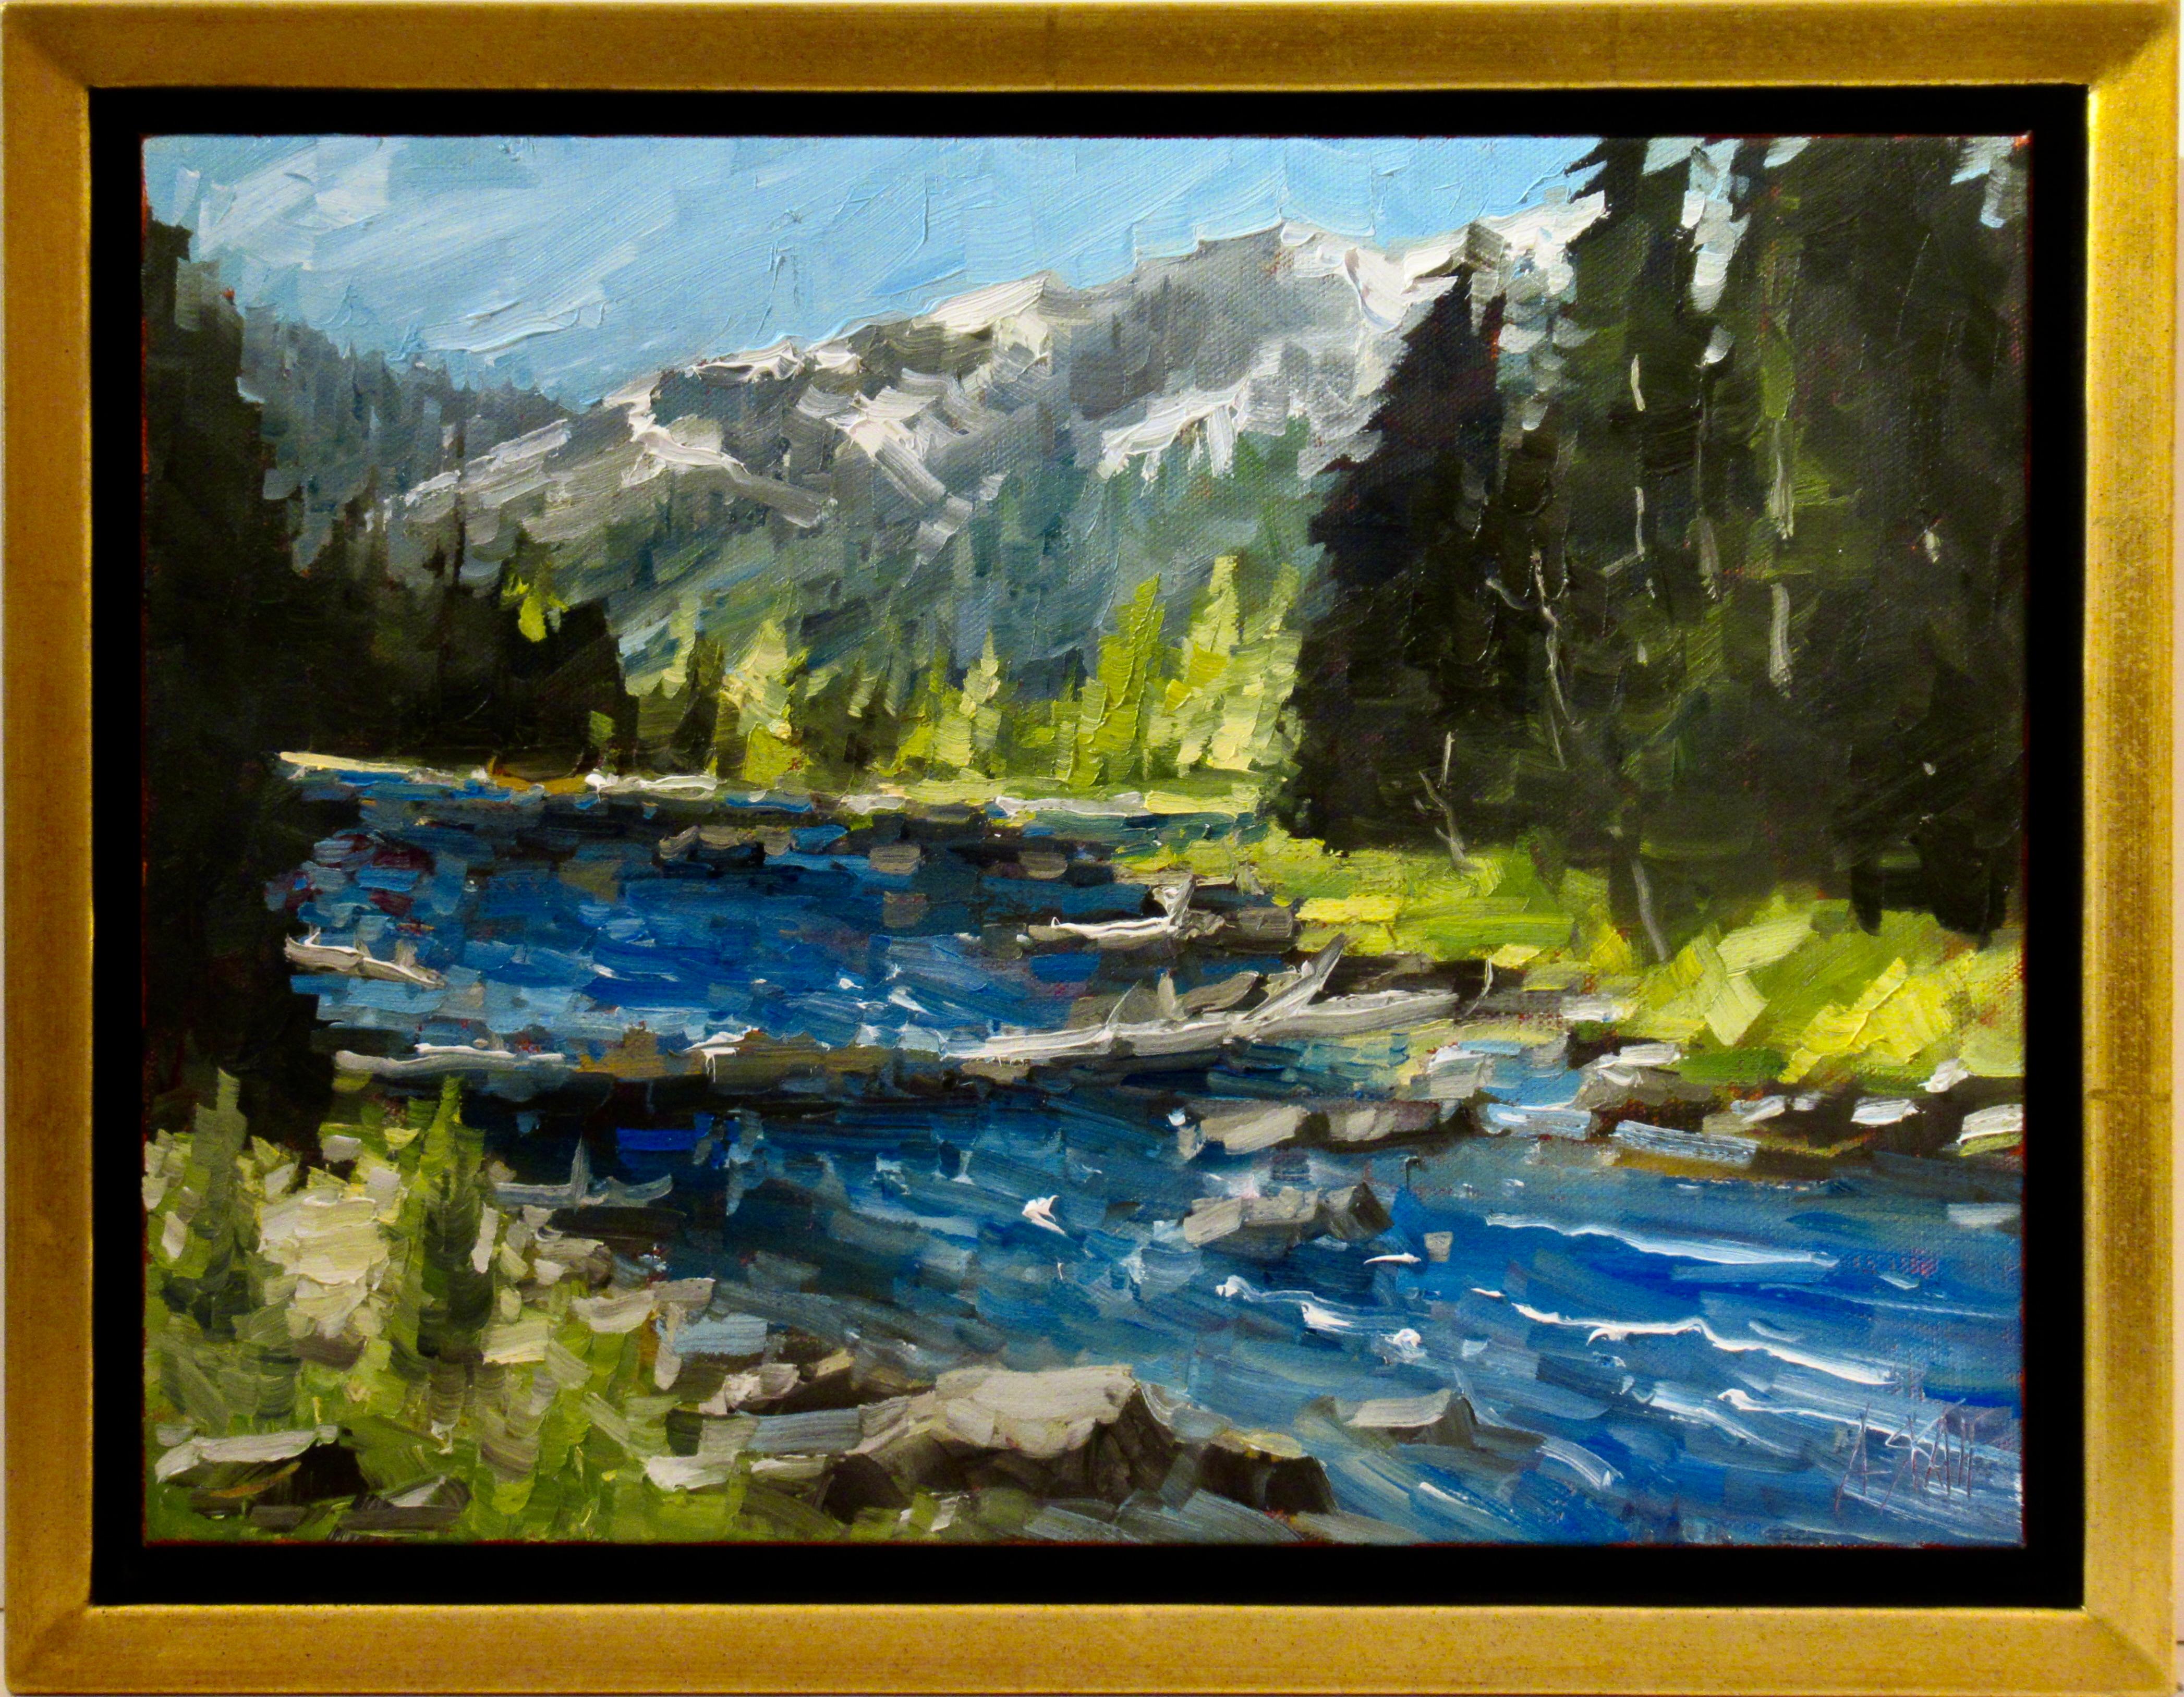 Andrew (Andy) Skaff Figurative Painting - Blackwood Spring Runoff